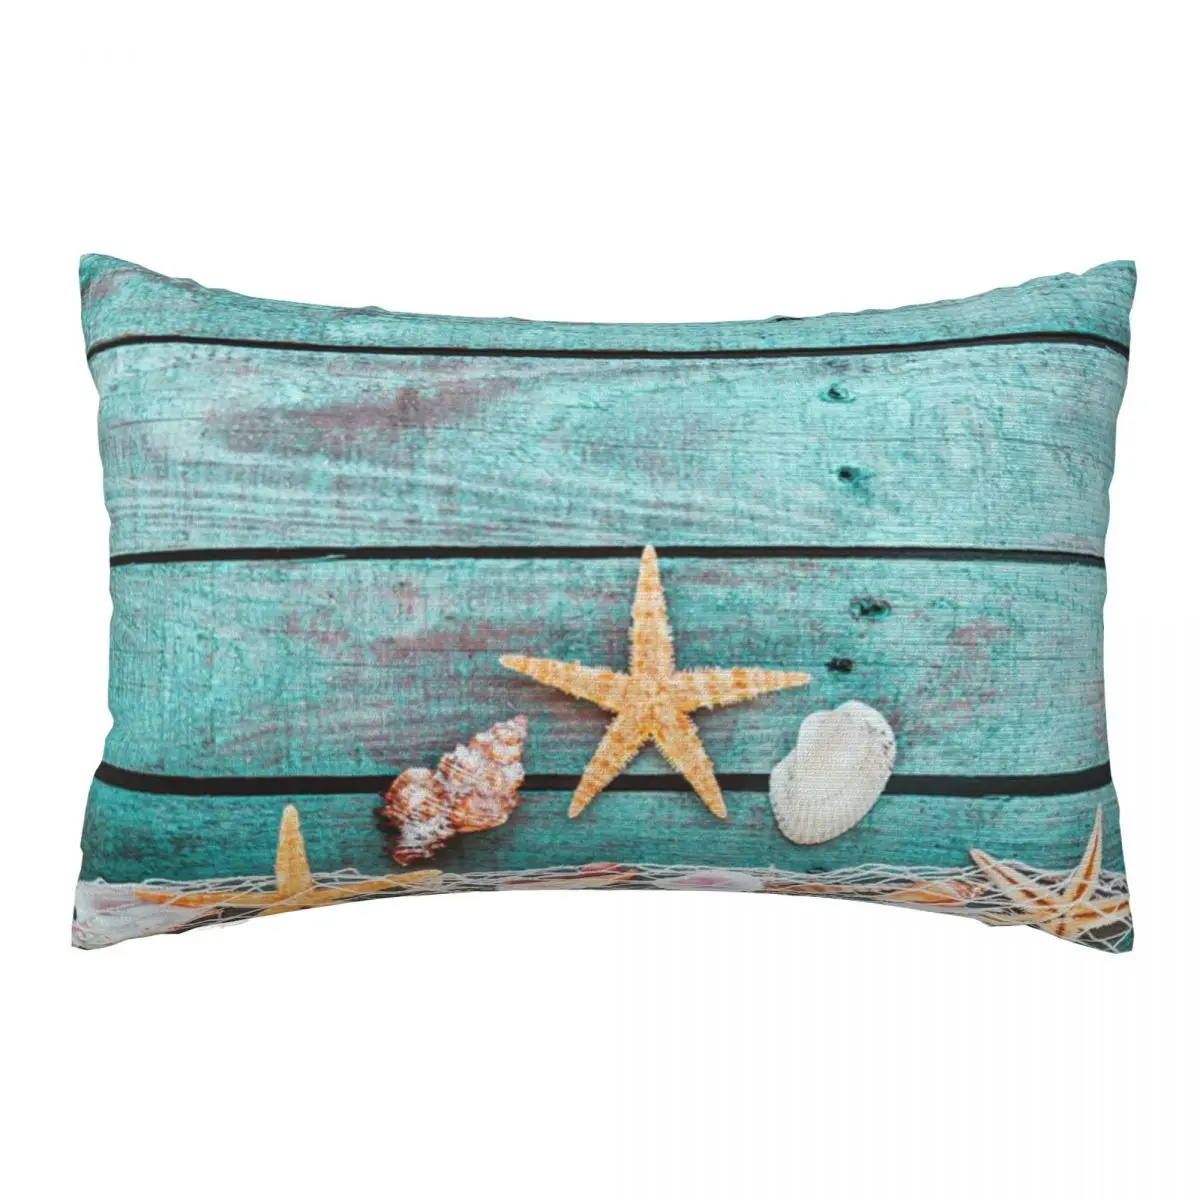 

Pretty Turquoise Blue Nautical Decorative Pillow Covers Throw Pillow Cover Home Pillows Shells Cushion Cover Zippered Pillowcase